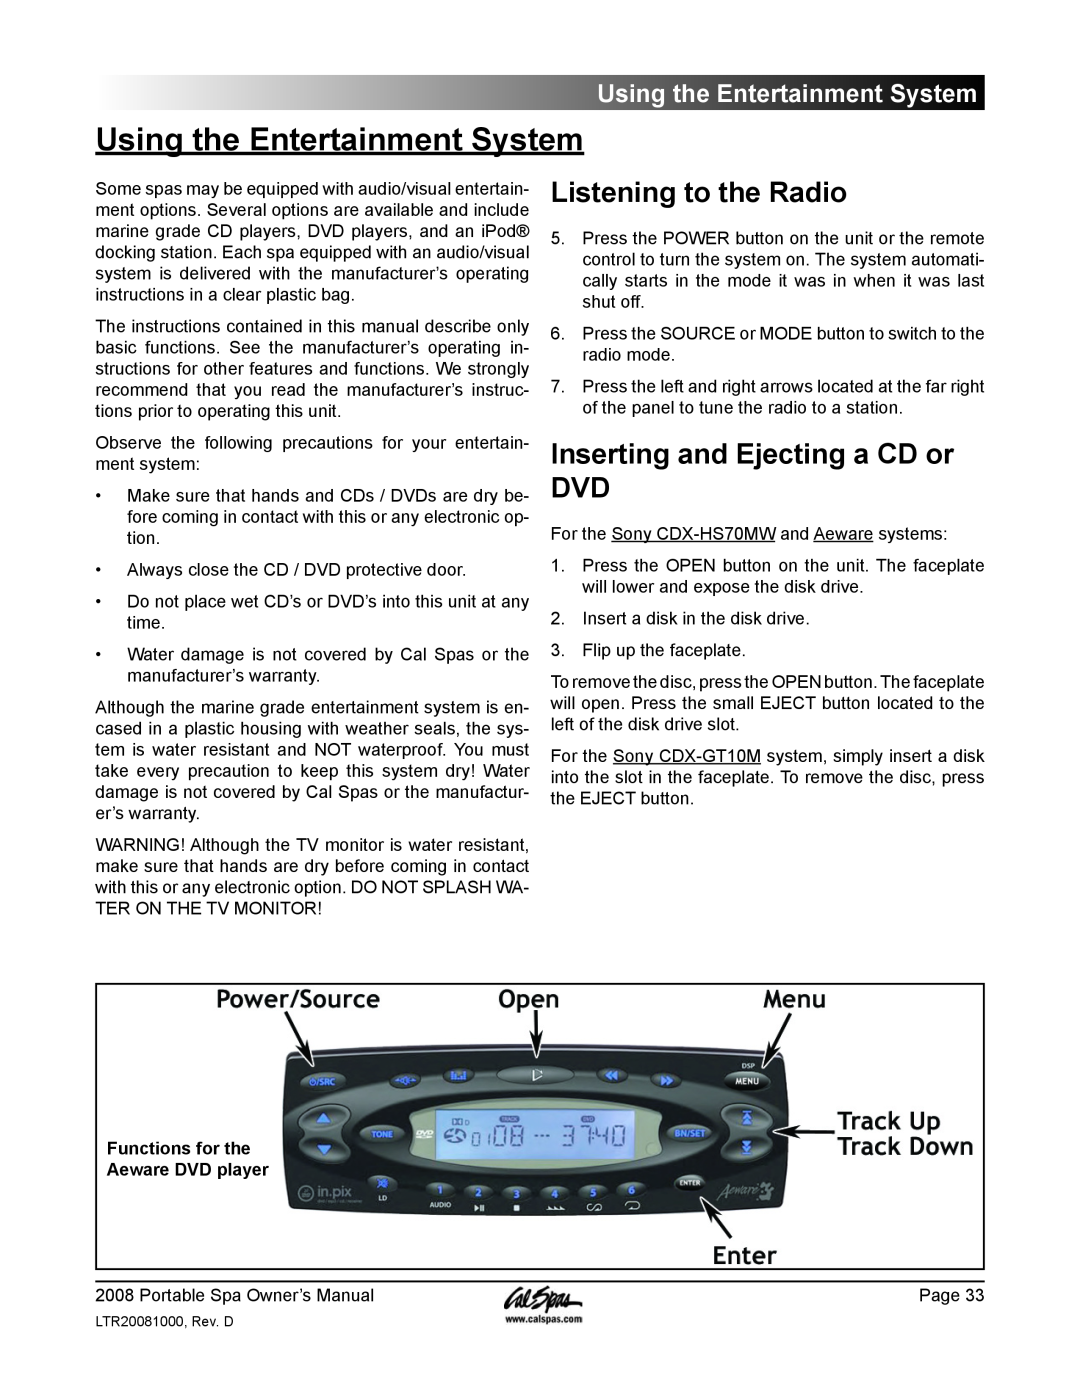 Cal Spas GFCI manual Using the Entertainment System, Listening to the Radio, Inserting and Ejecting a CD or DVD 